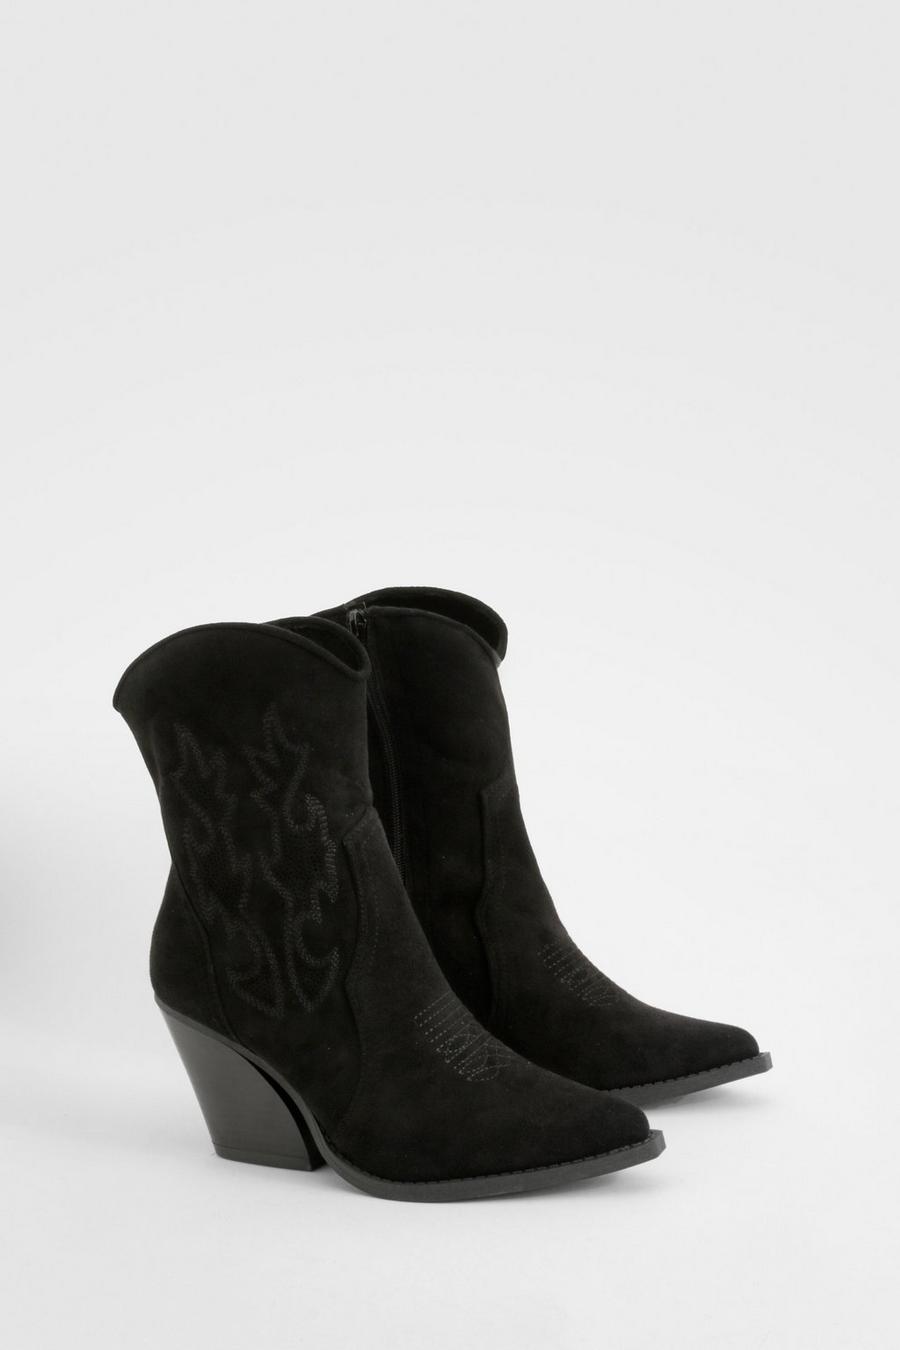 Black Embroidered Calf High Cowboy Boots image number 1